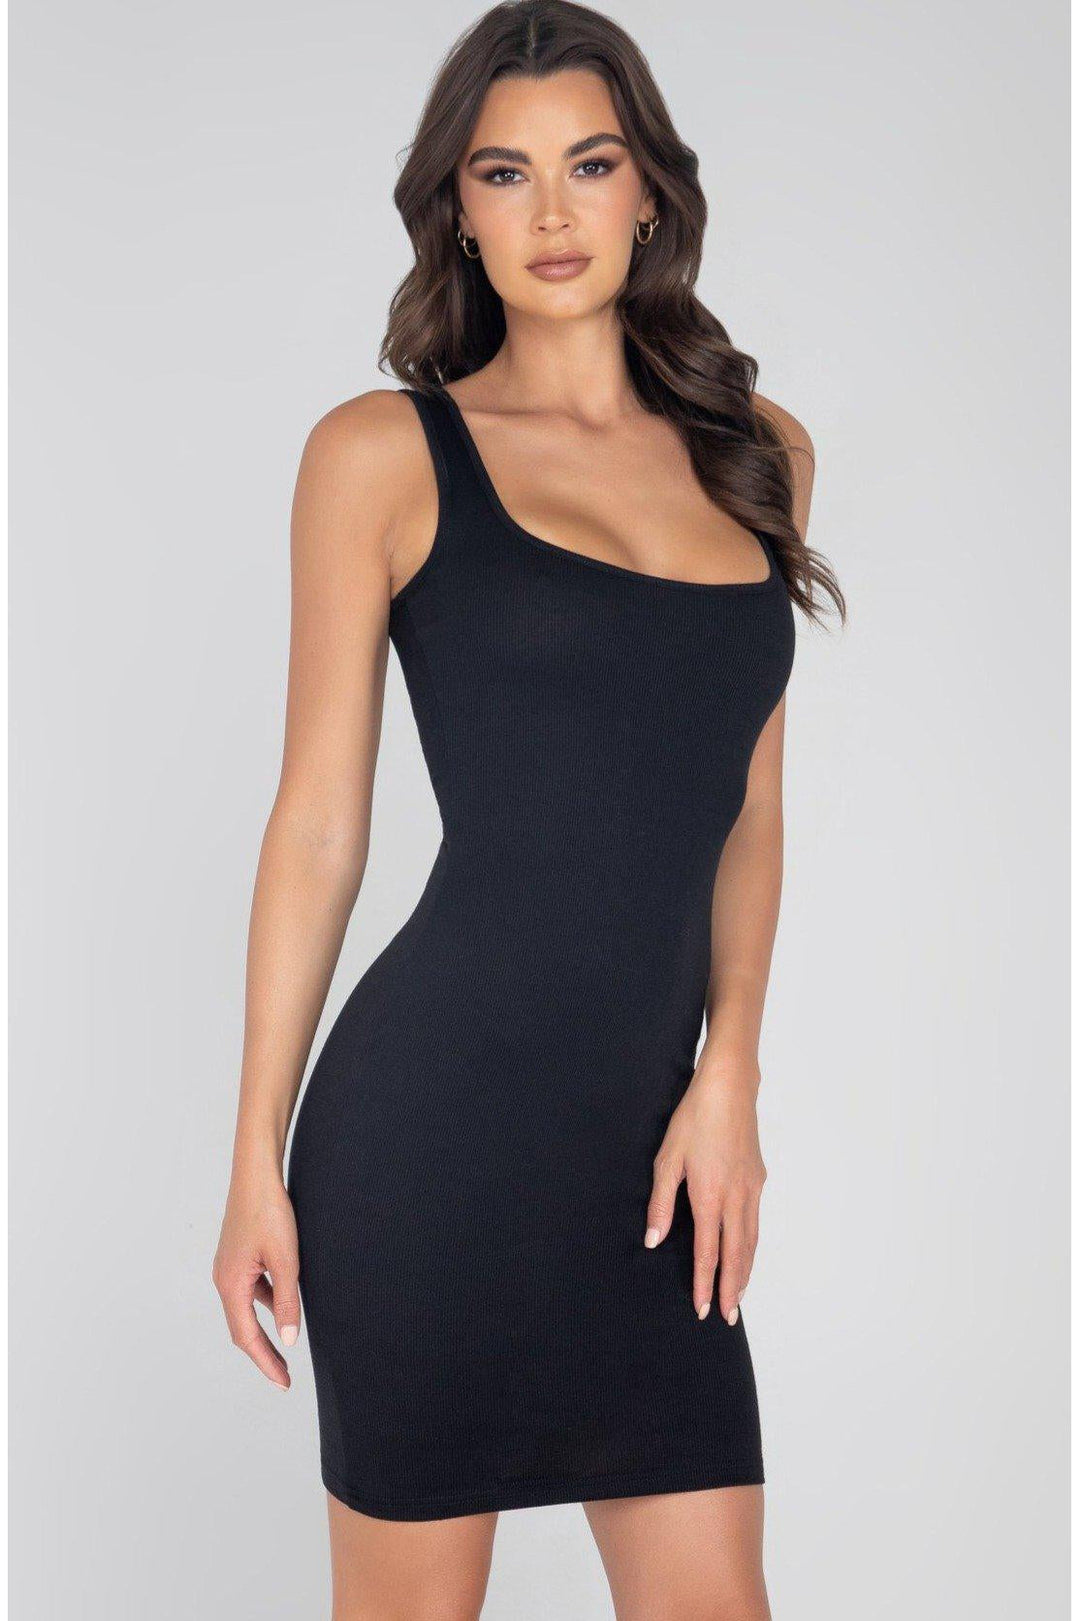 SS-Basic Above The Knee Ribbed Dress-Clothing-Roma Brand-Black-M-SEXYSHOES.COM